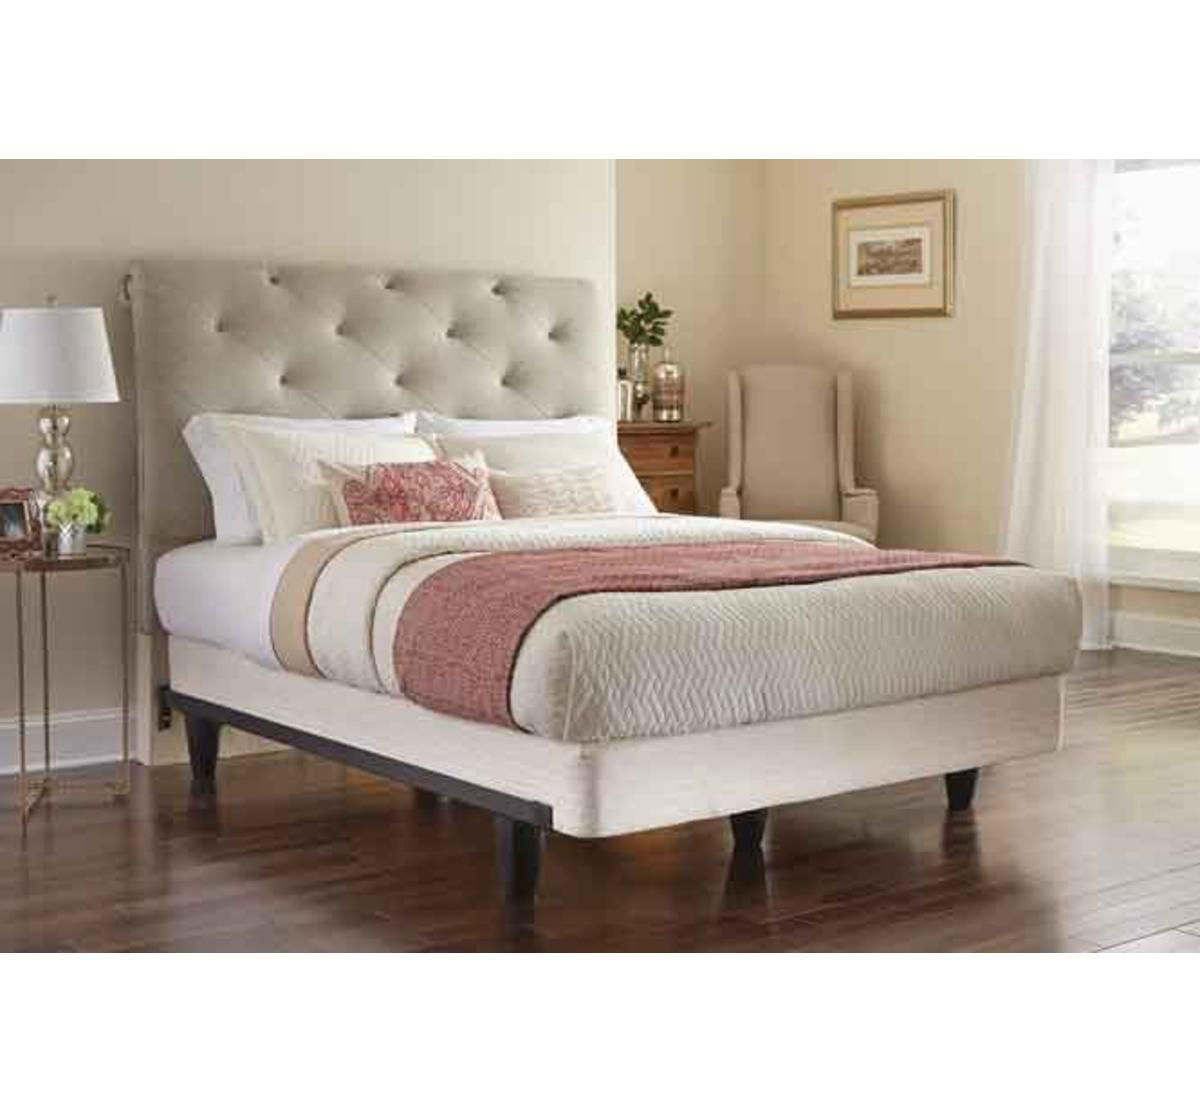 The enGauge Queen Bed Frame | Badcock Home Furniture &more